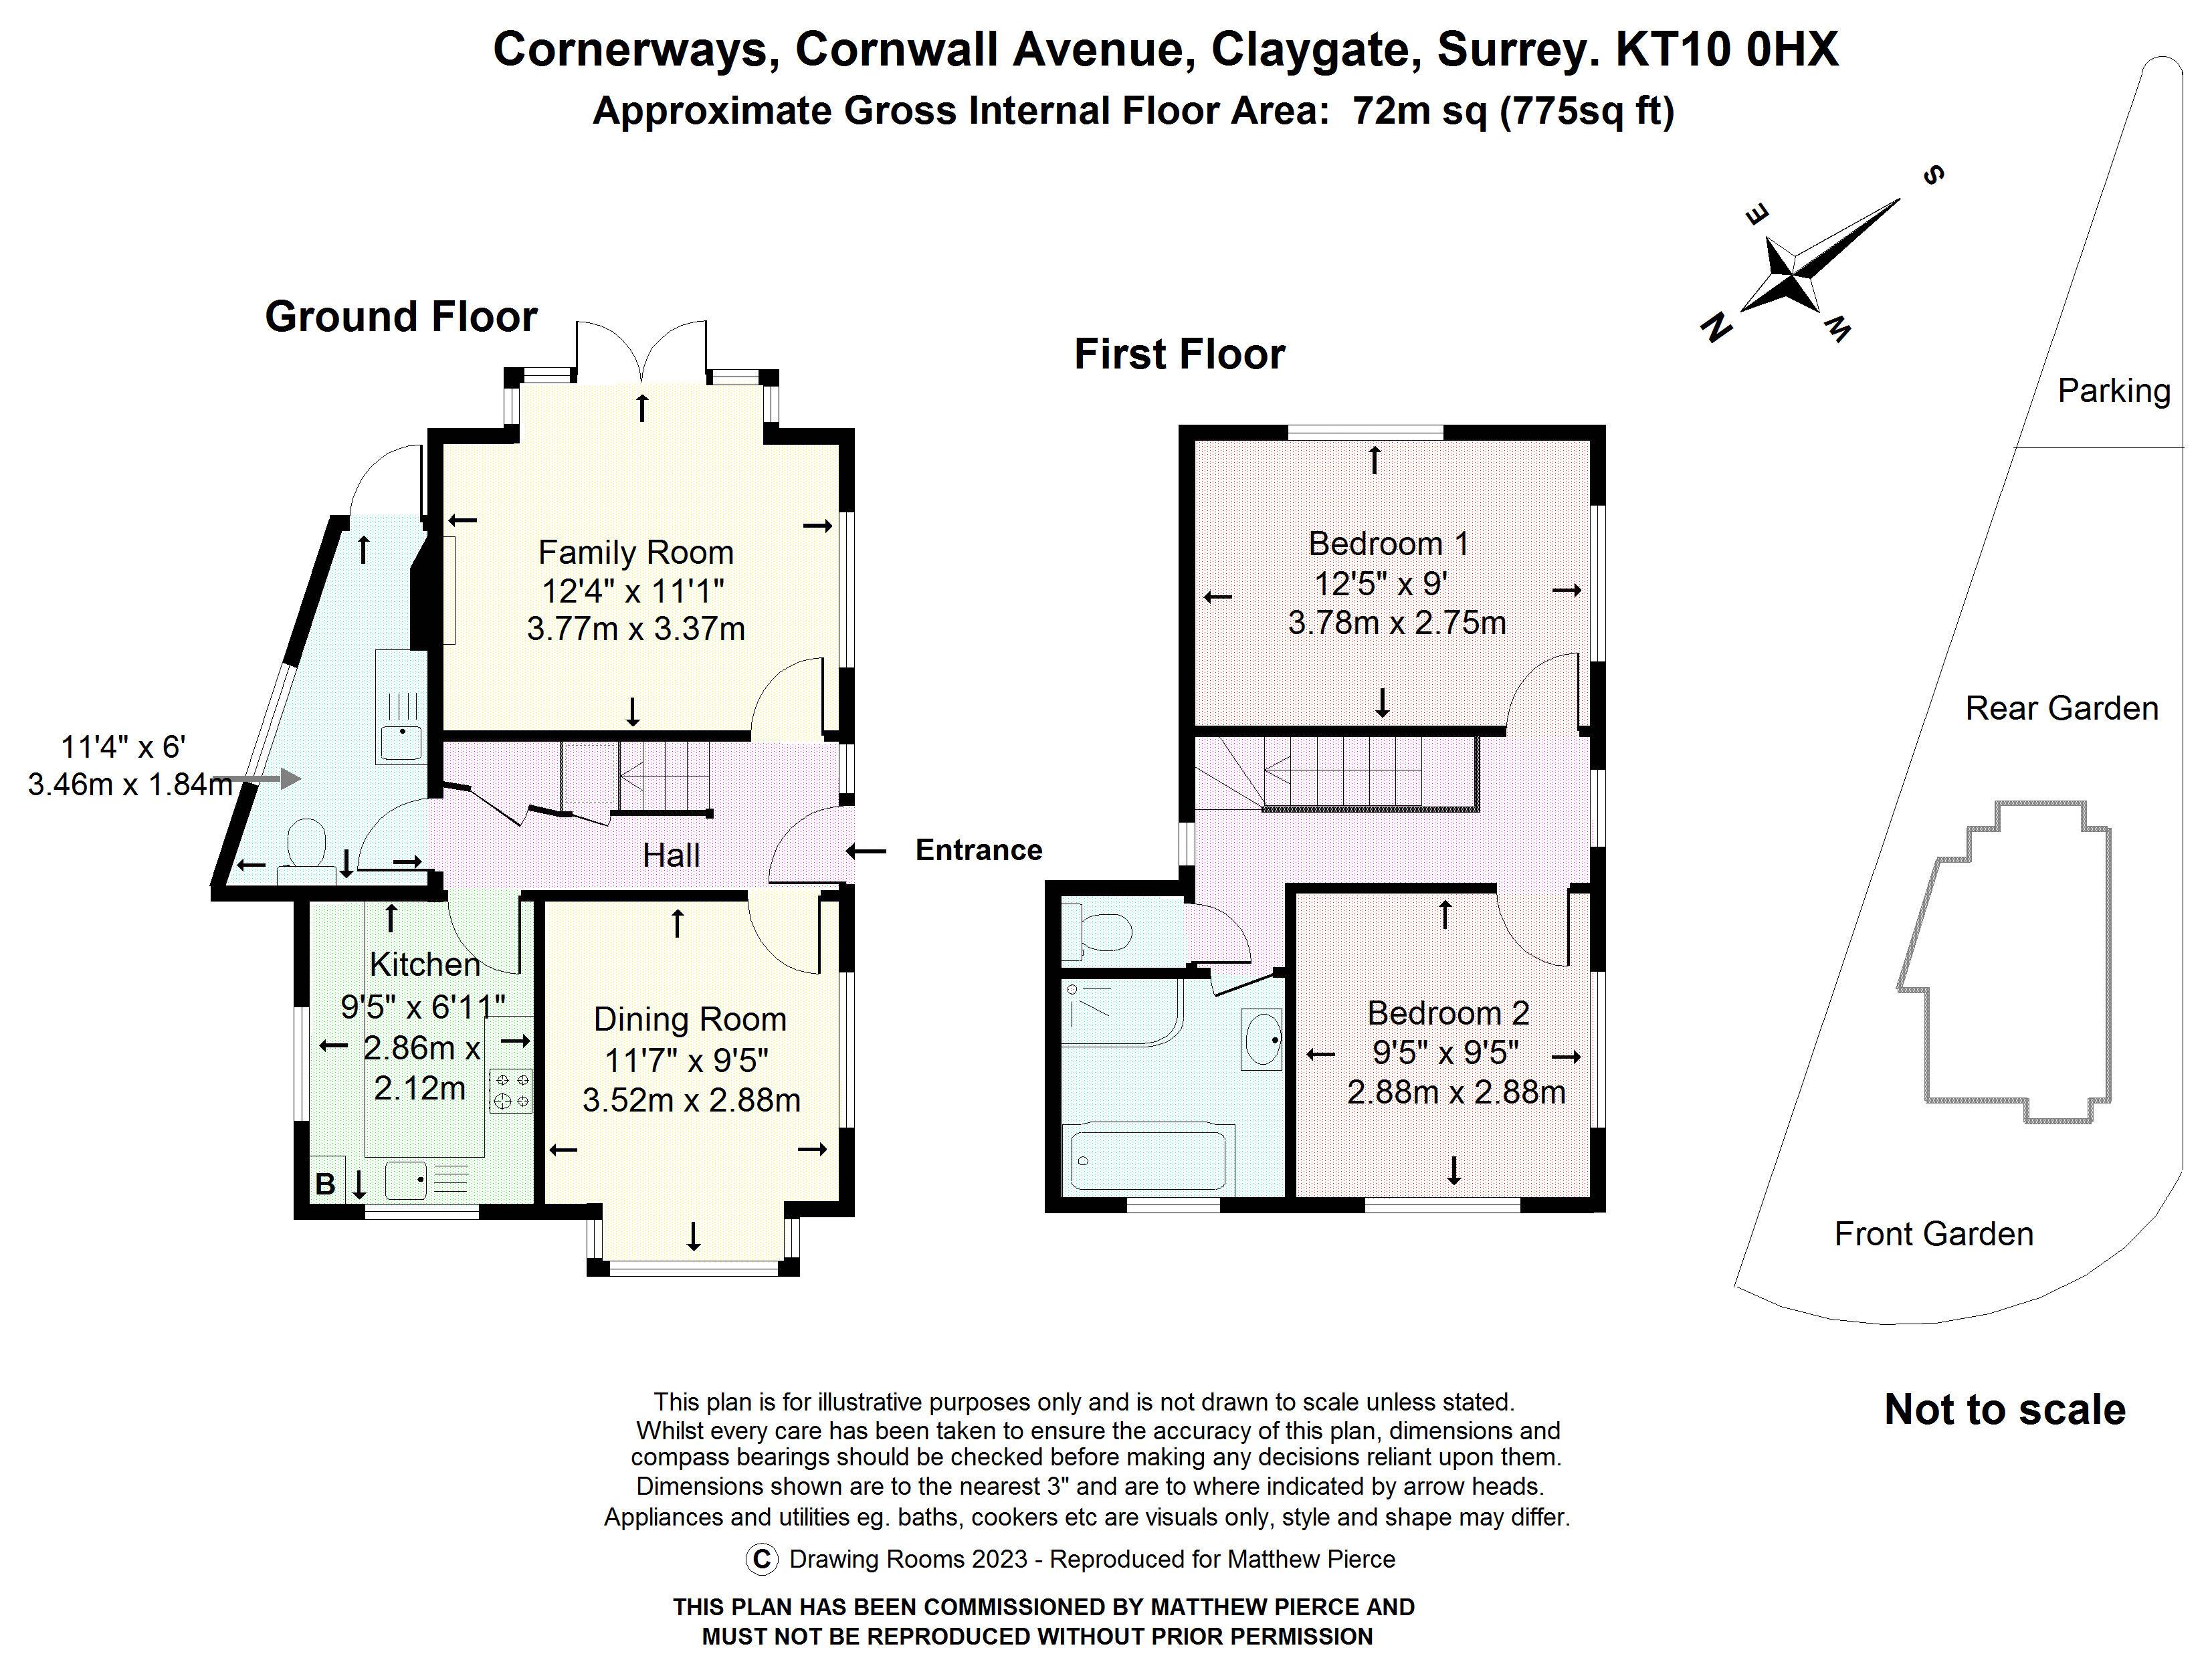 Floorplans For Cornwall Avenue, Claygate